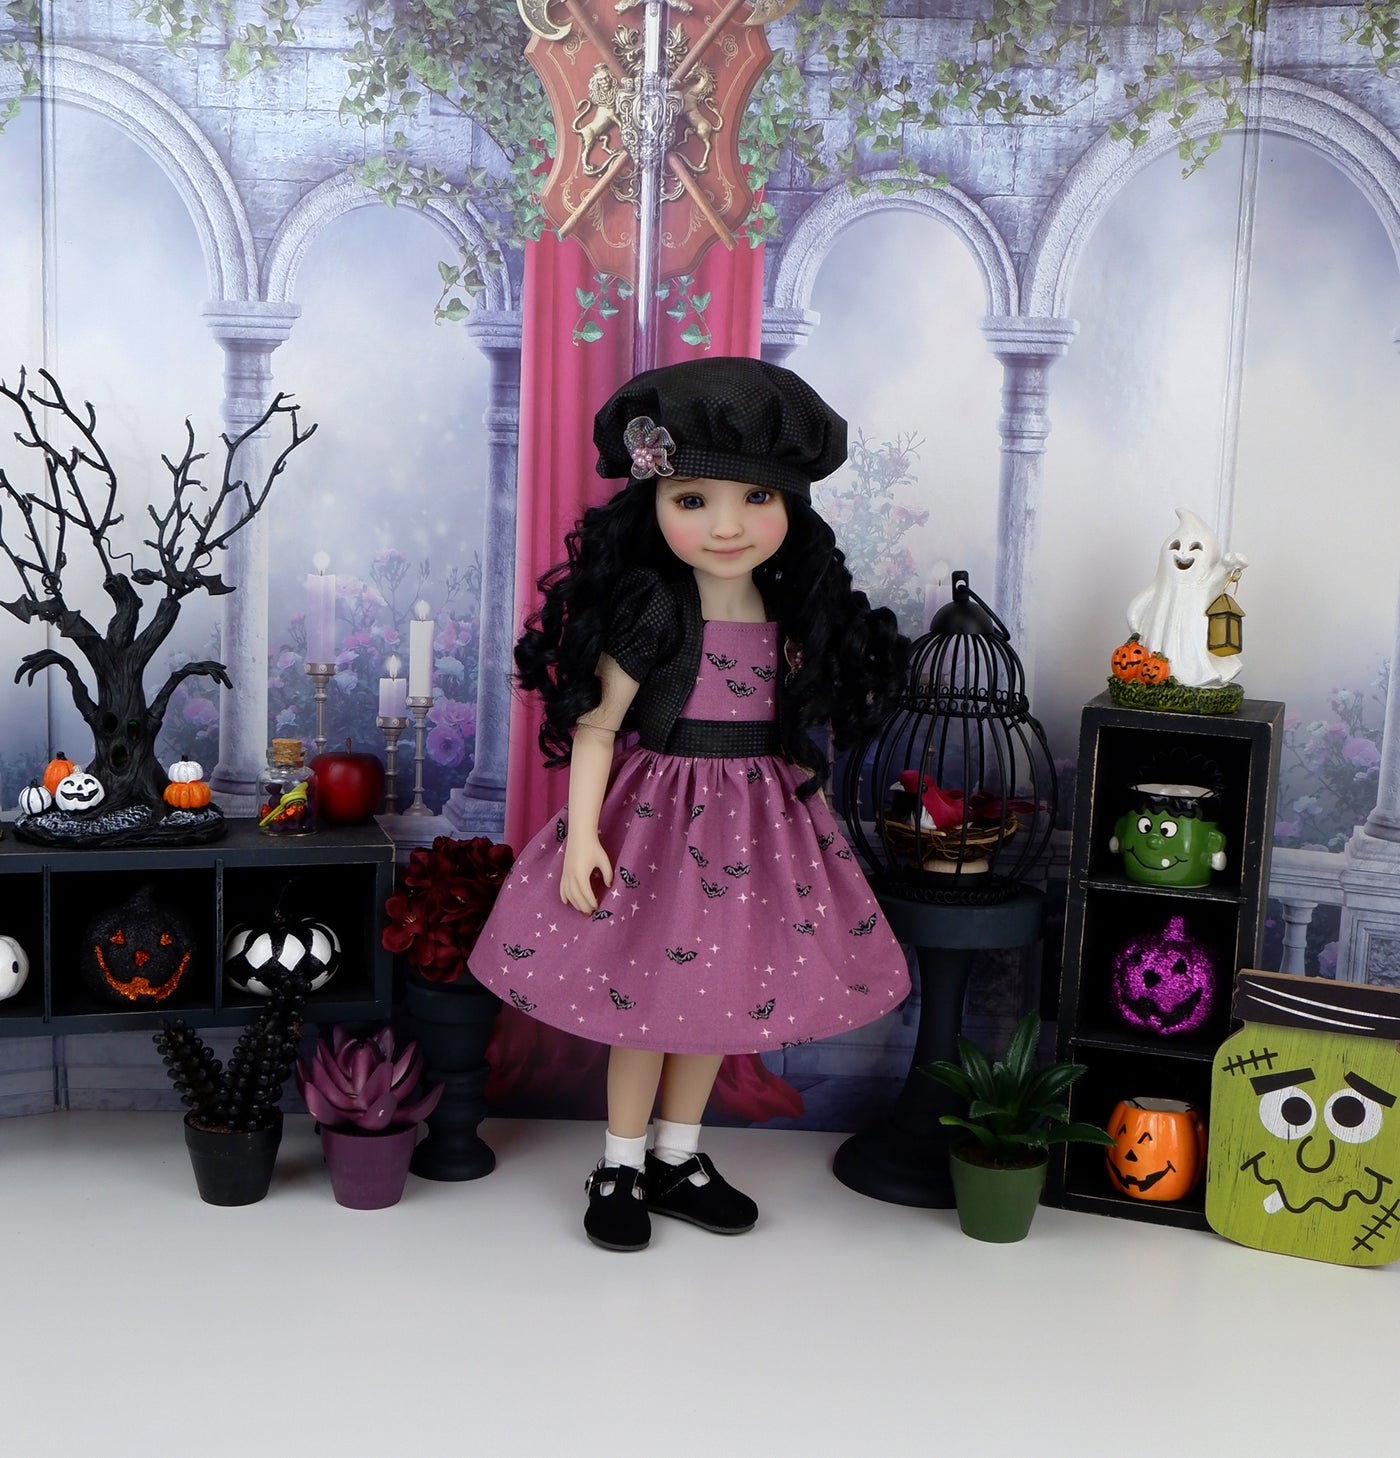 Twilight Bats - dress & jacket with shoes for Ruby Red Fashion Friends doll